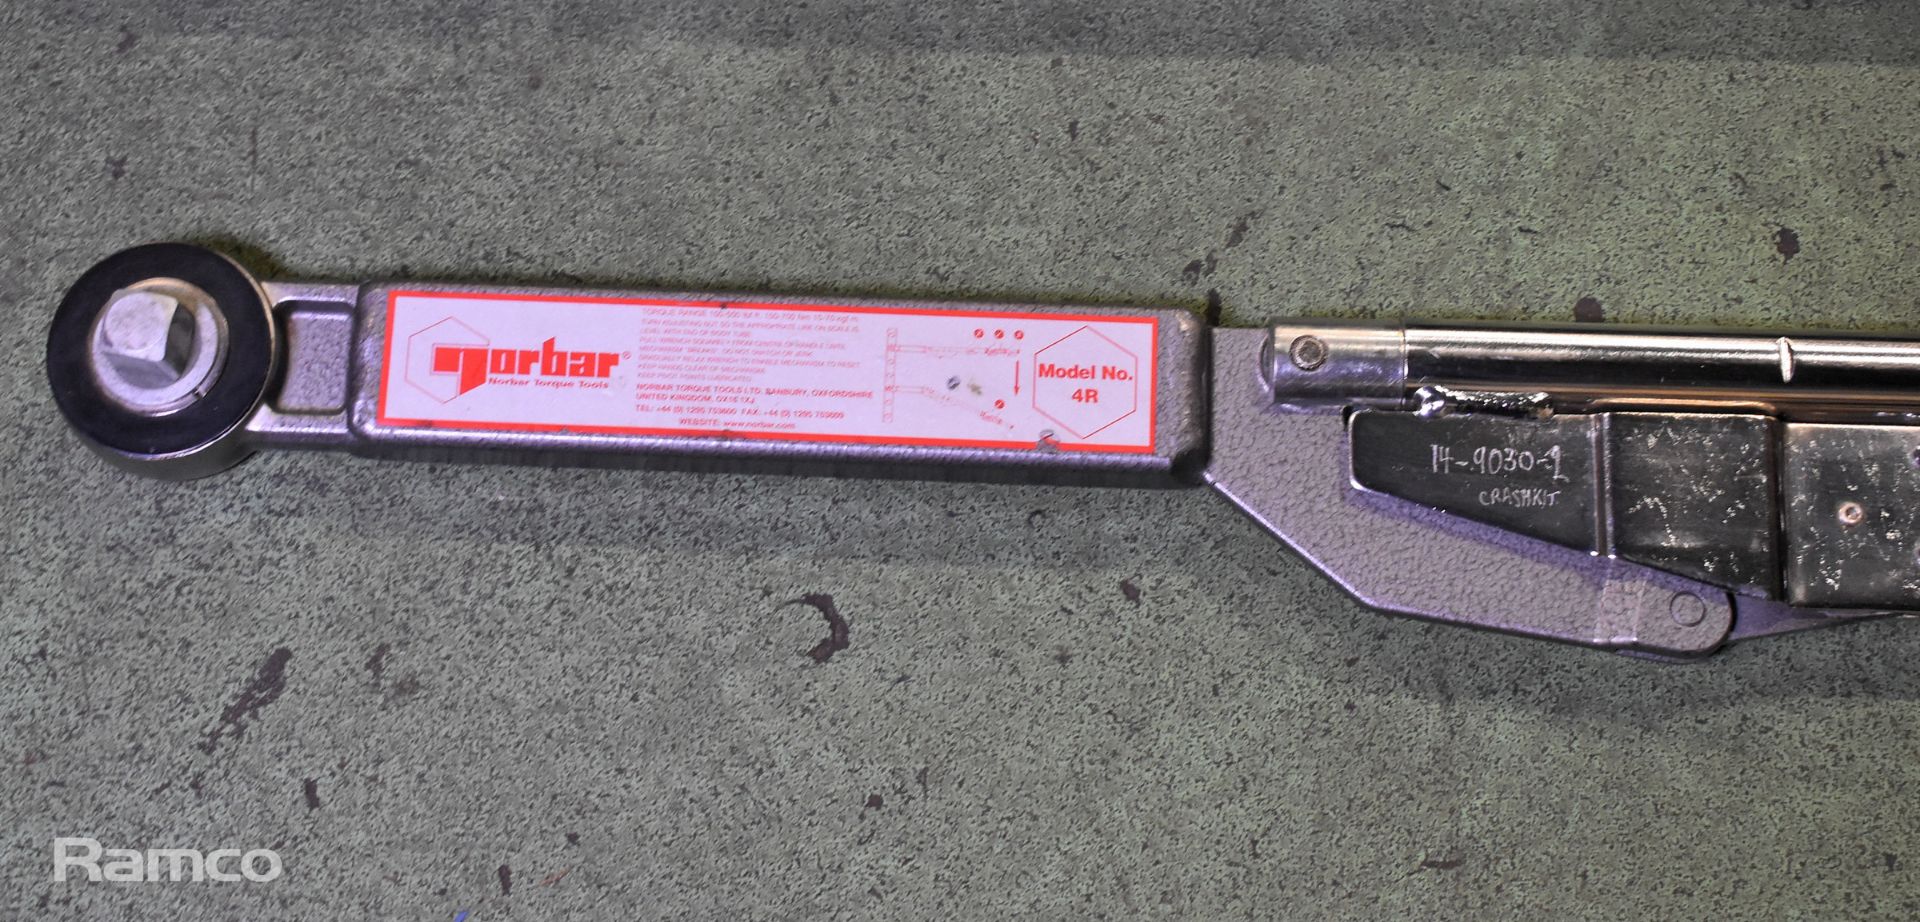 Norbar 4R 3/4 inch drive torque wrench with storage case - Image 2 of 4